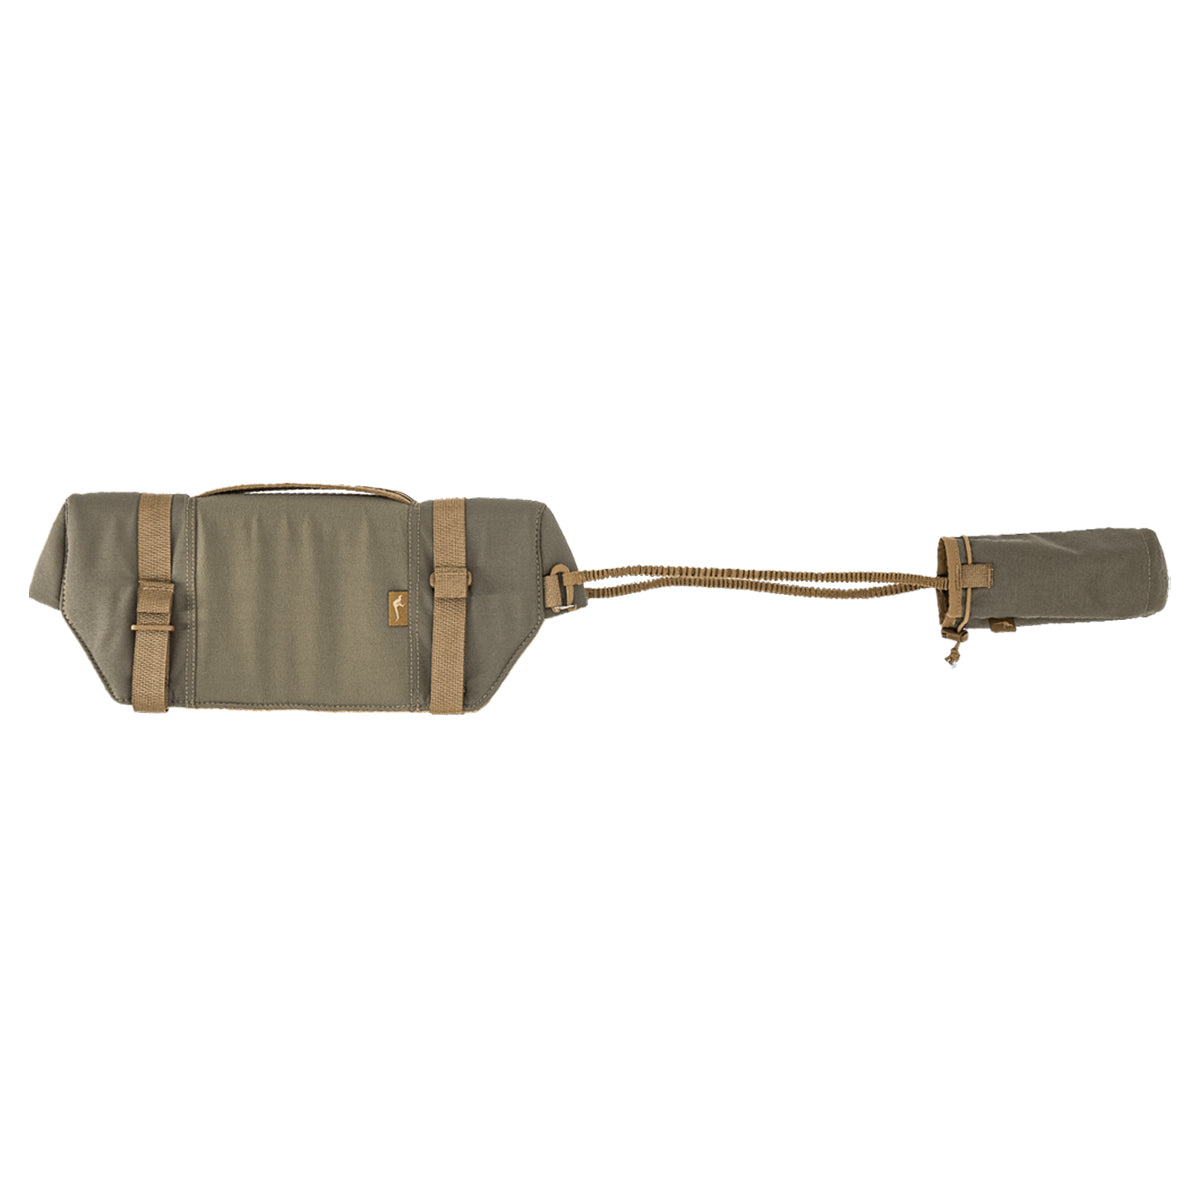 Marsupial Gear Padded Scope and Muzzle Cover in Ranger Green by GOHUNT | Marsupial Gear - GOHUNT Shop